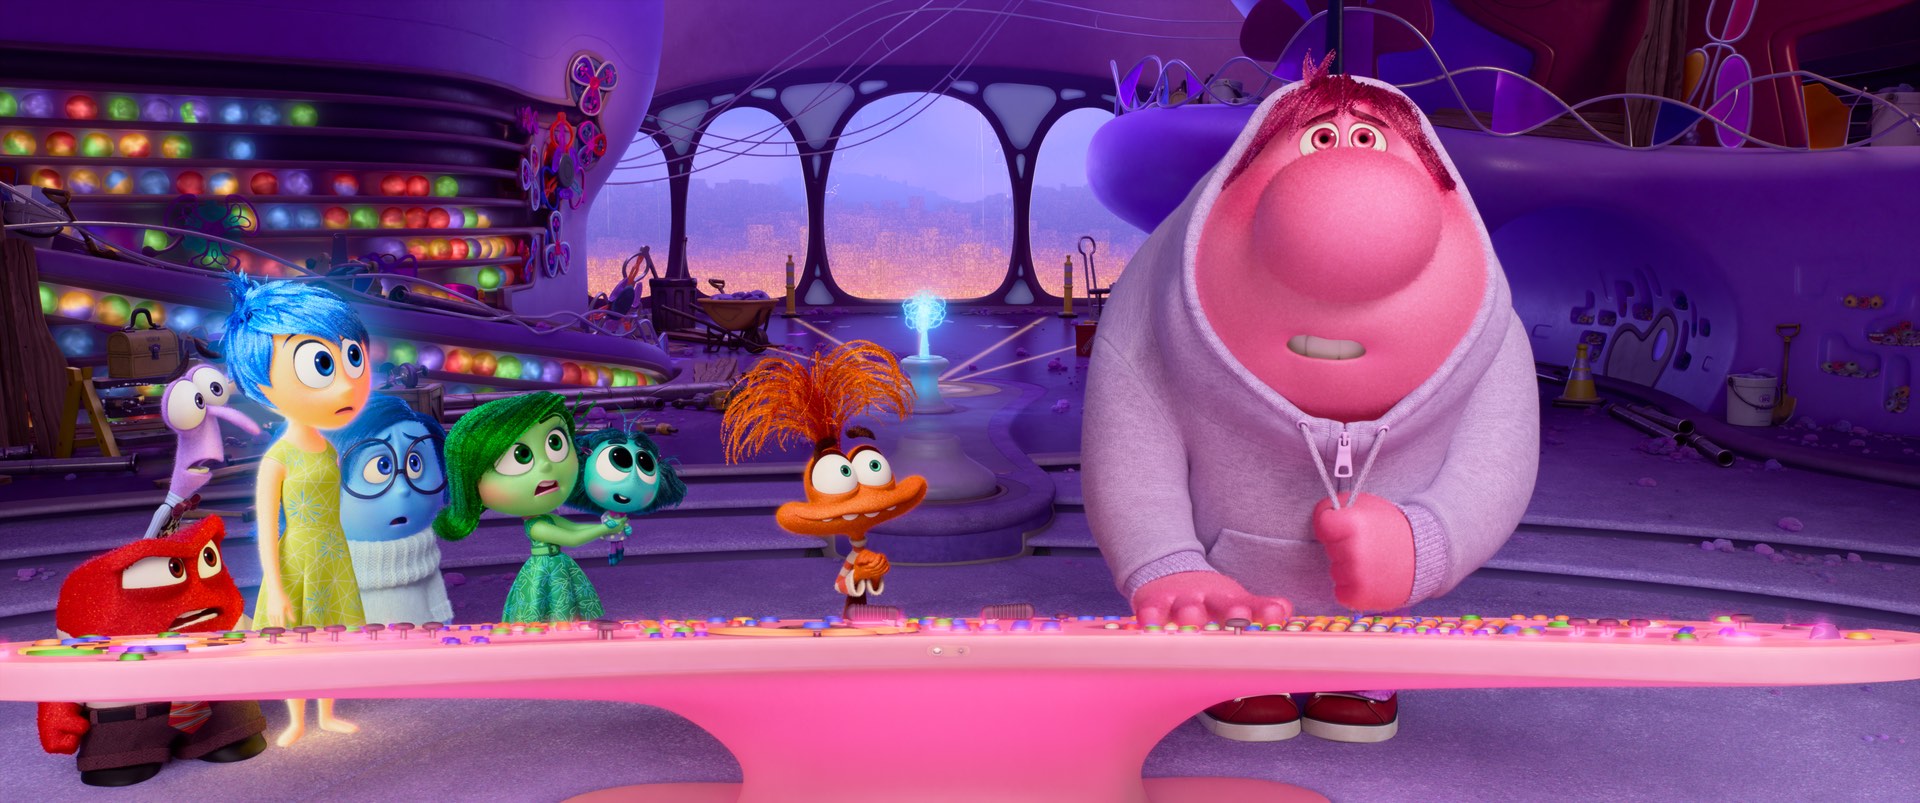 Inside out 2 movie